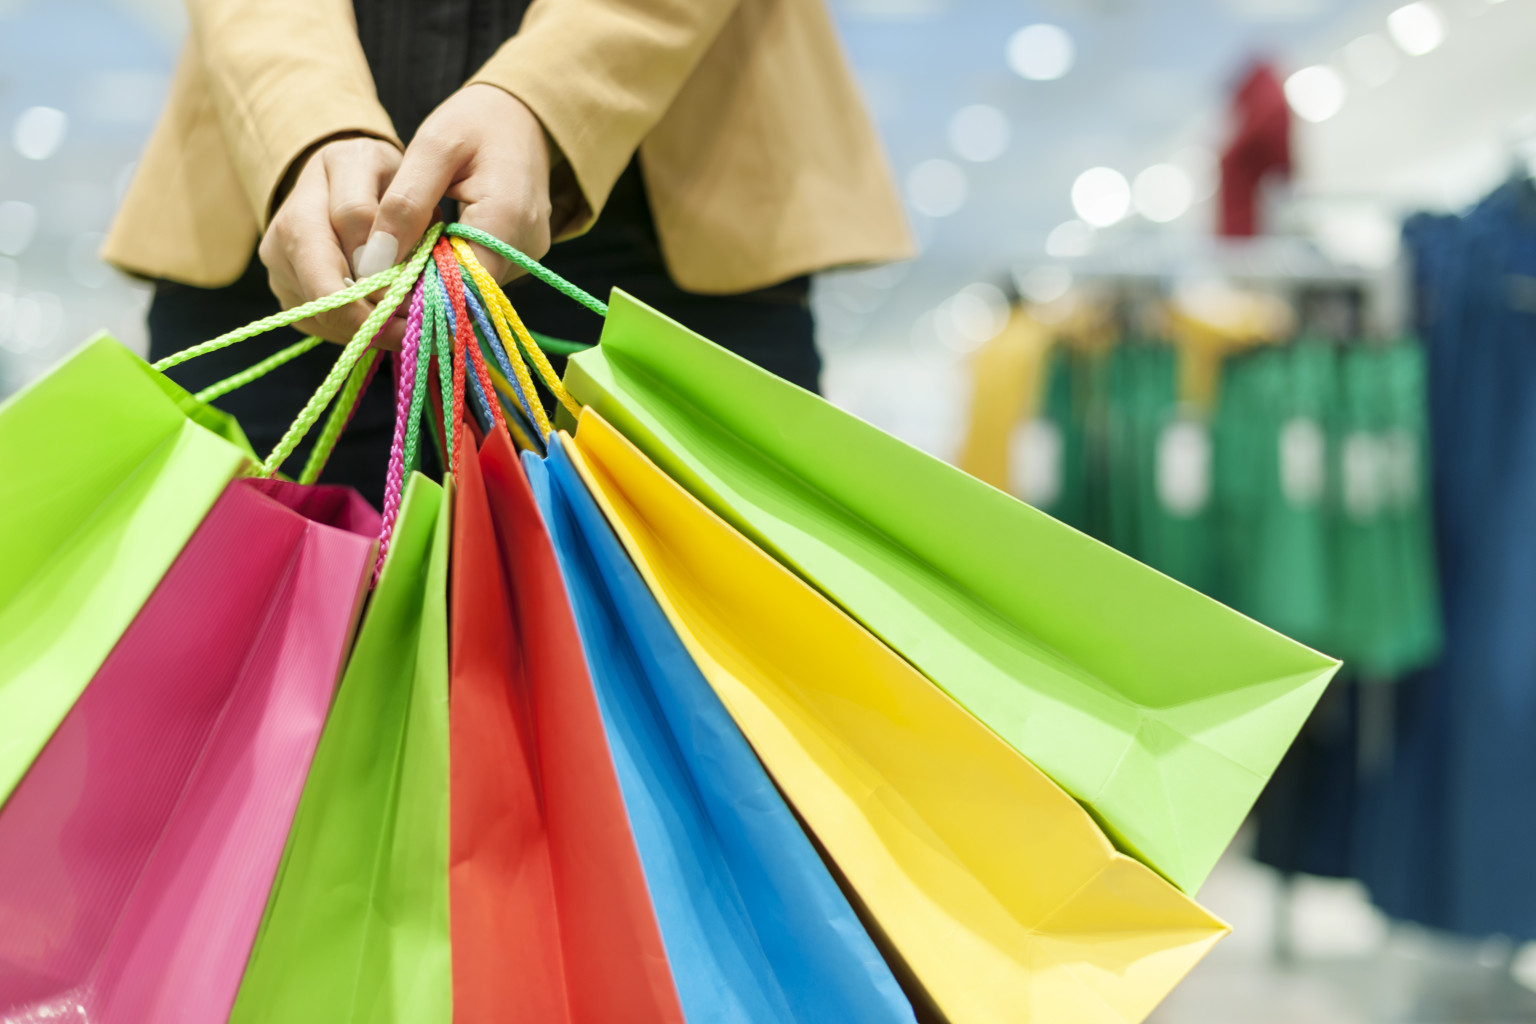 Compulsive Shoppers Overspend To Boost Mood, Study Finds | HuffPost